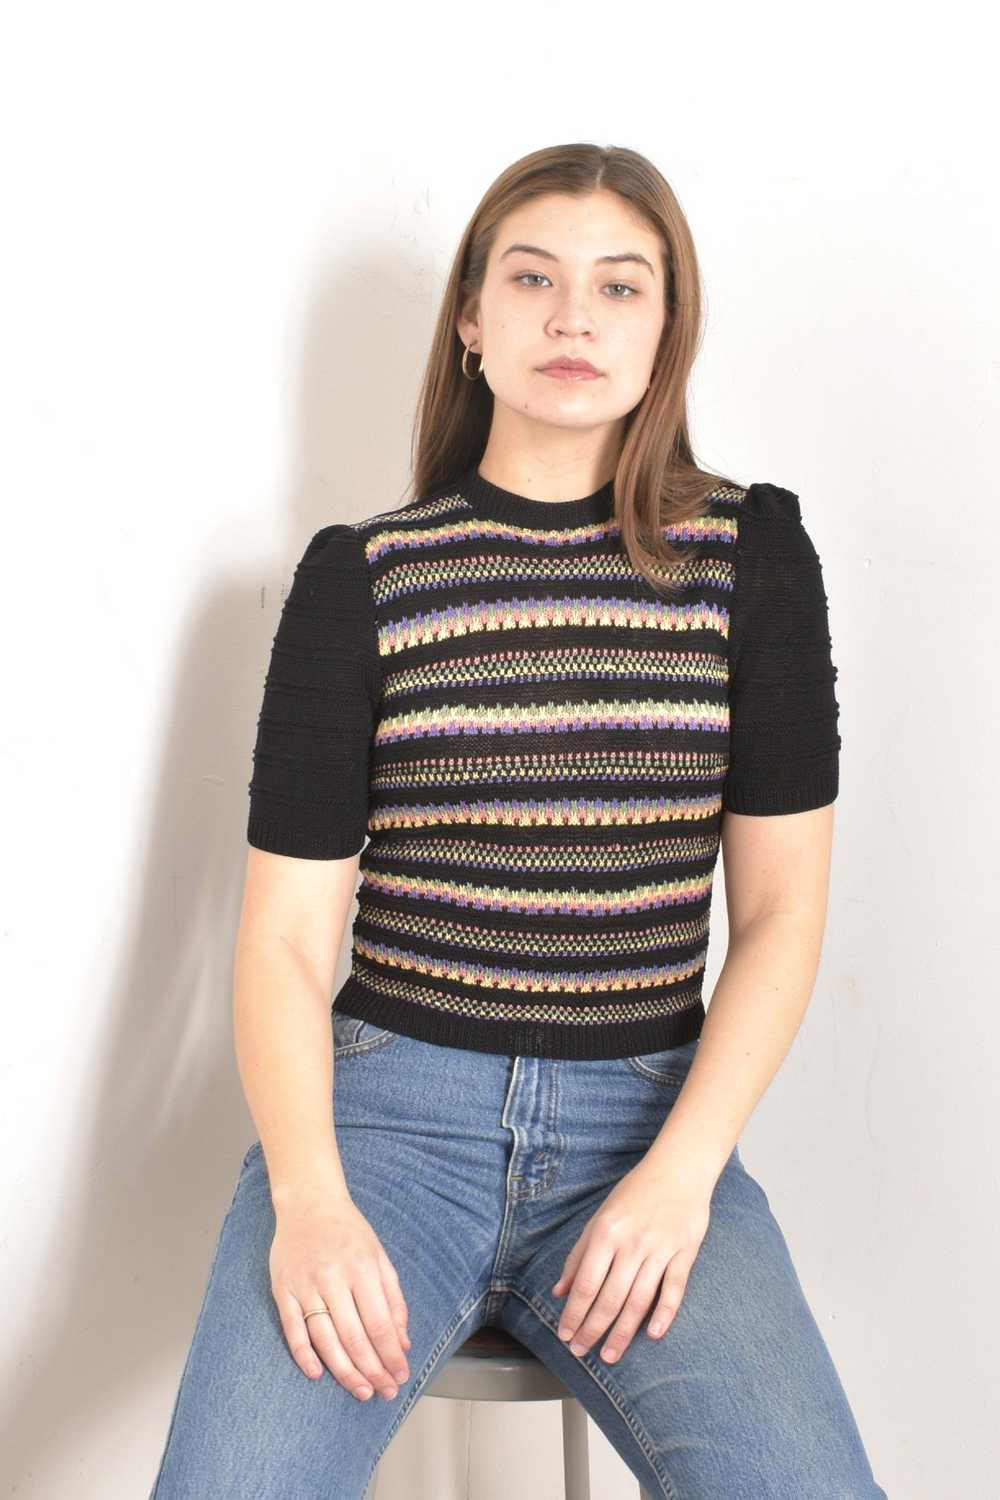 1940s Striped Knit Sweater-small - image 1